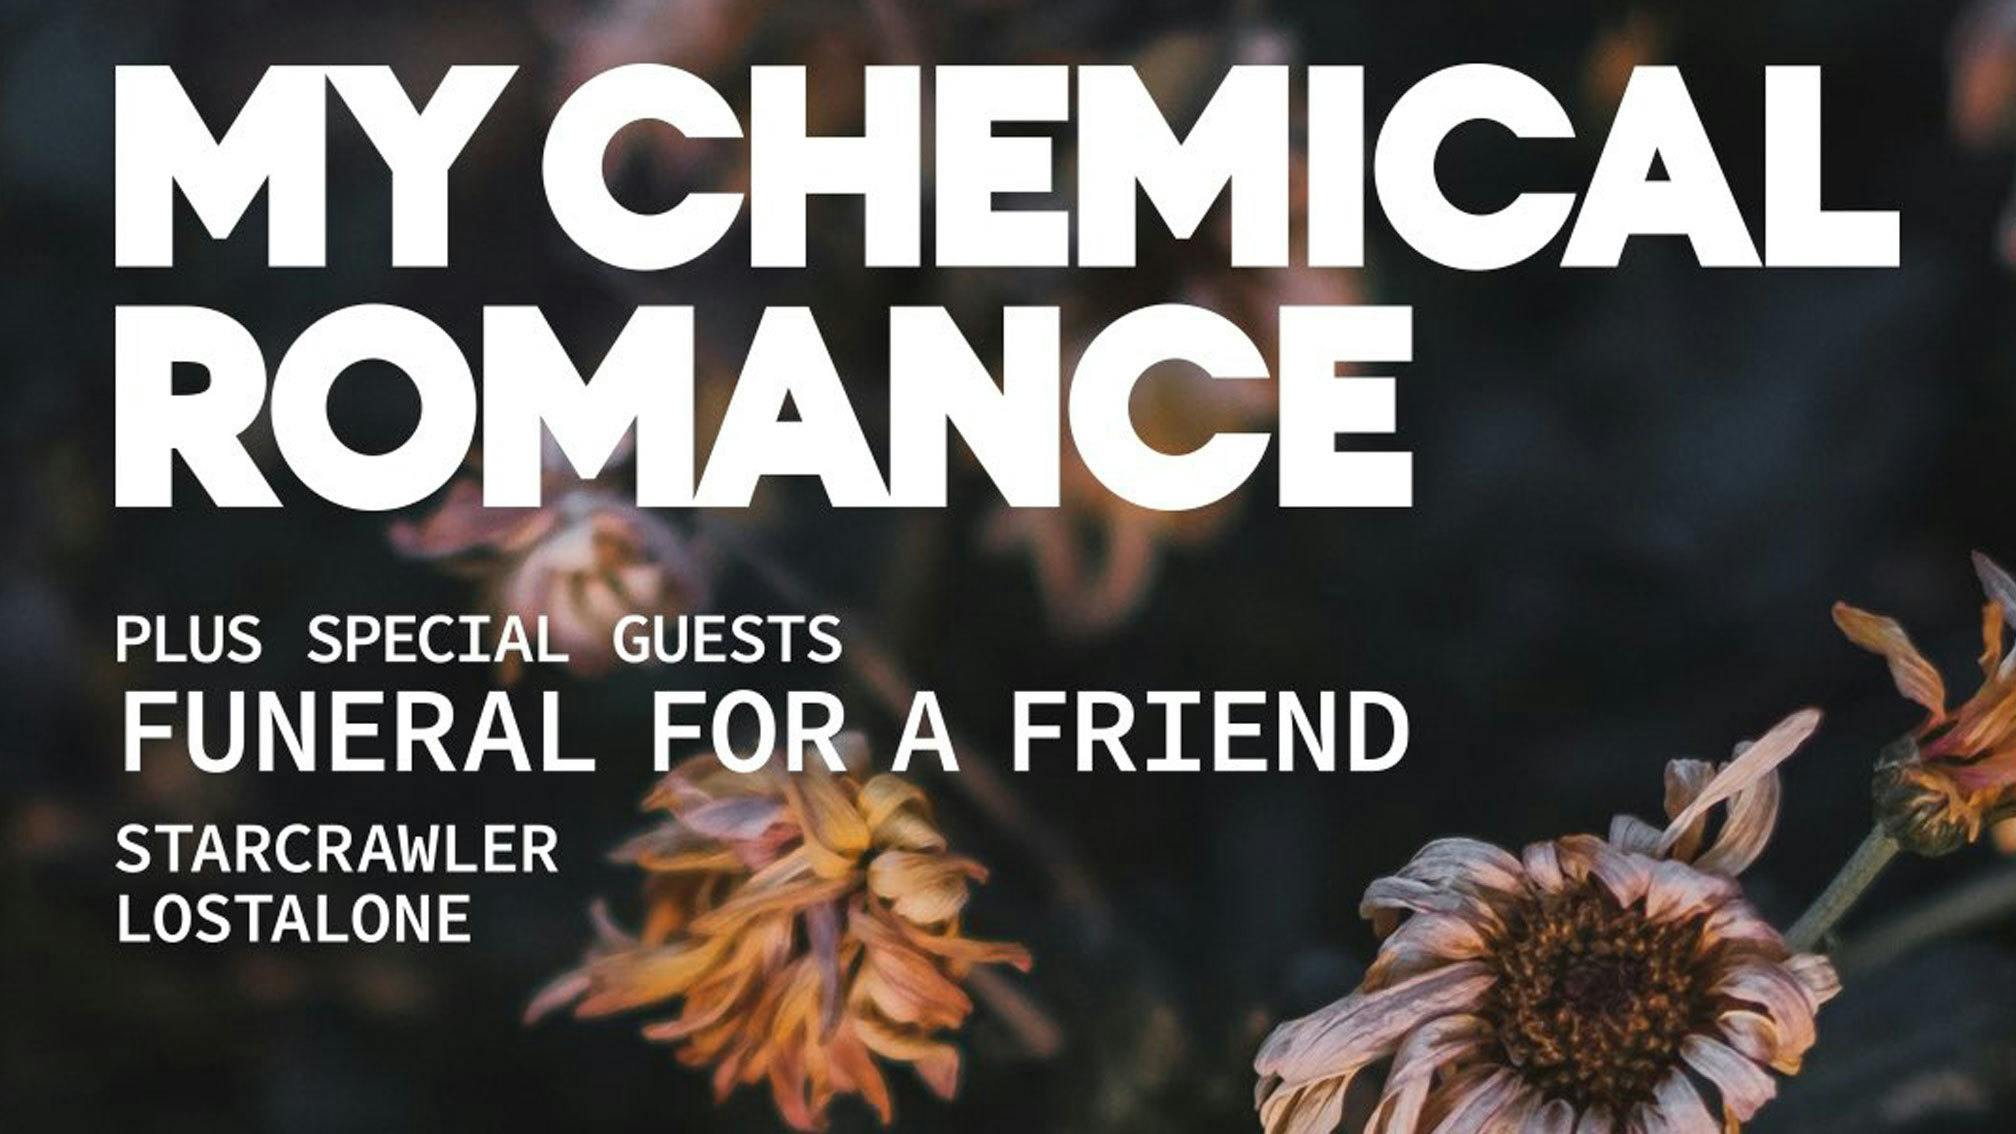 Funeral For A Friend announced as special guests for My Chemical Romance’s Cardiff show